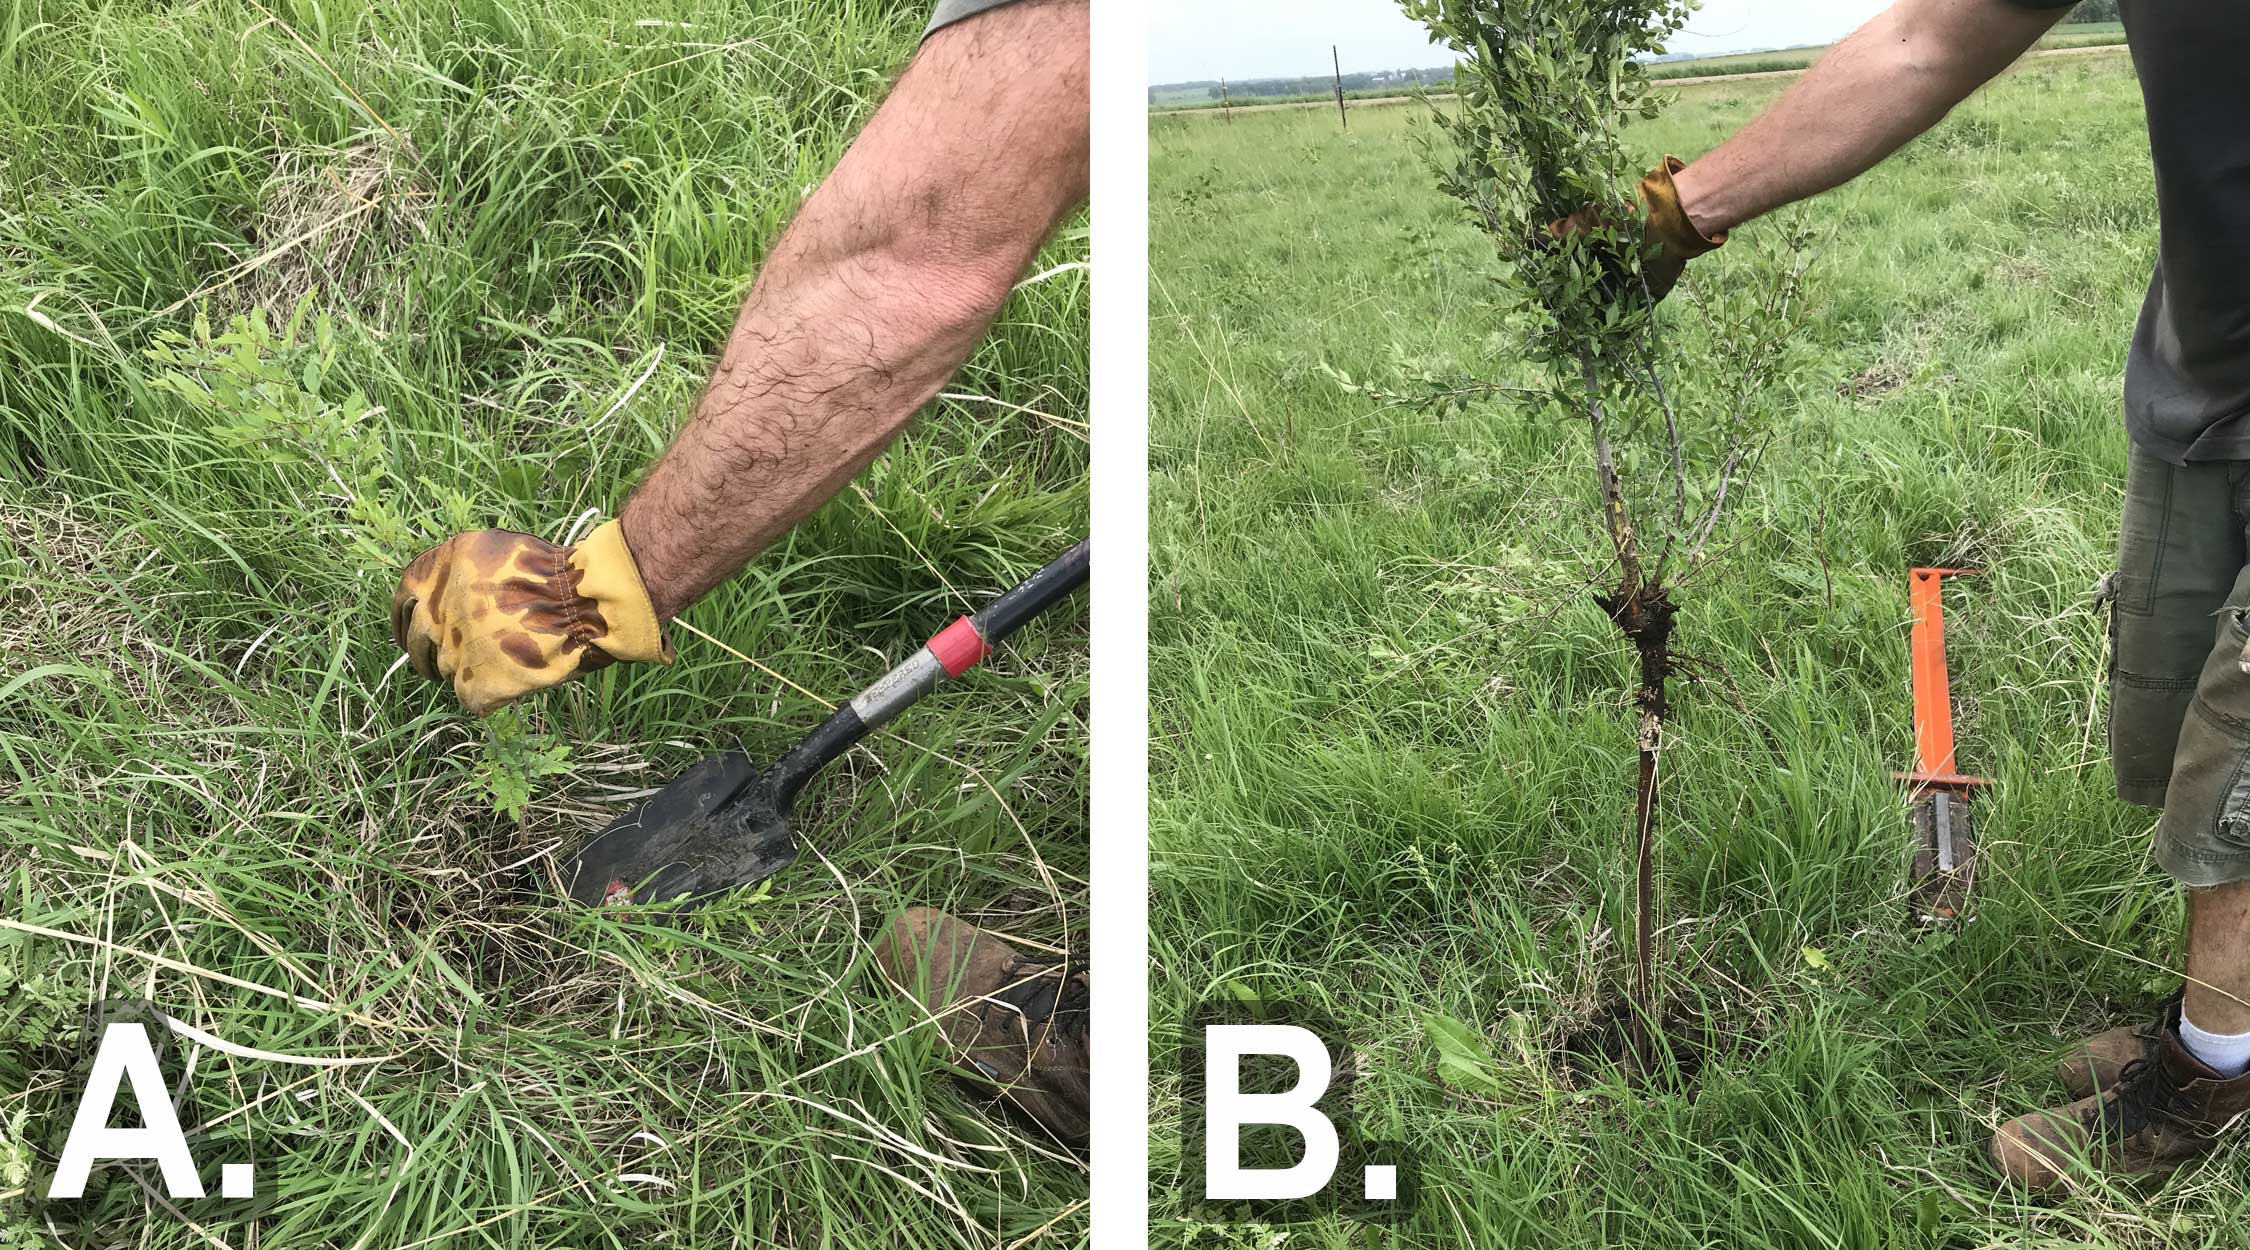 Left: Figure 3-A. Hand pulling small sapling out of the ground. Right: Figure 3-B sappling being pulled out with the assistance of a tool.